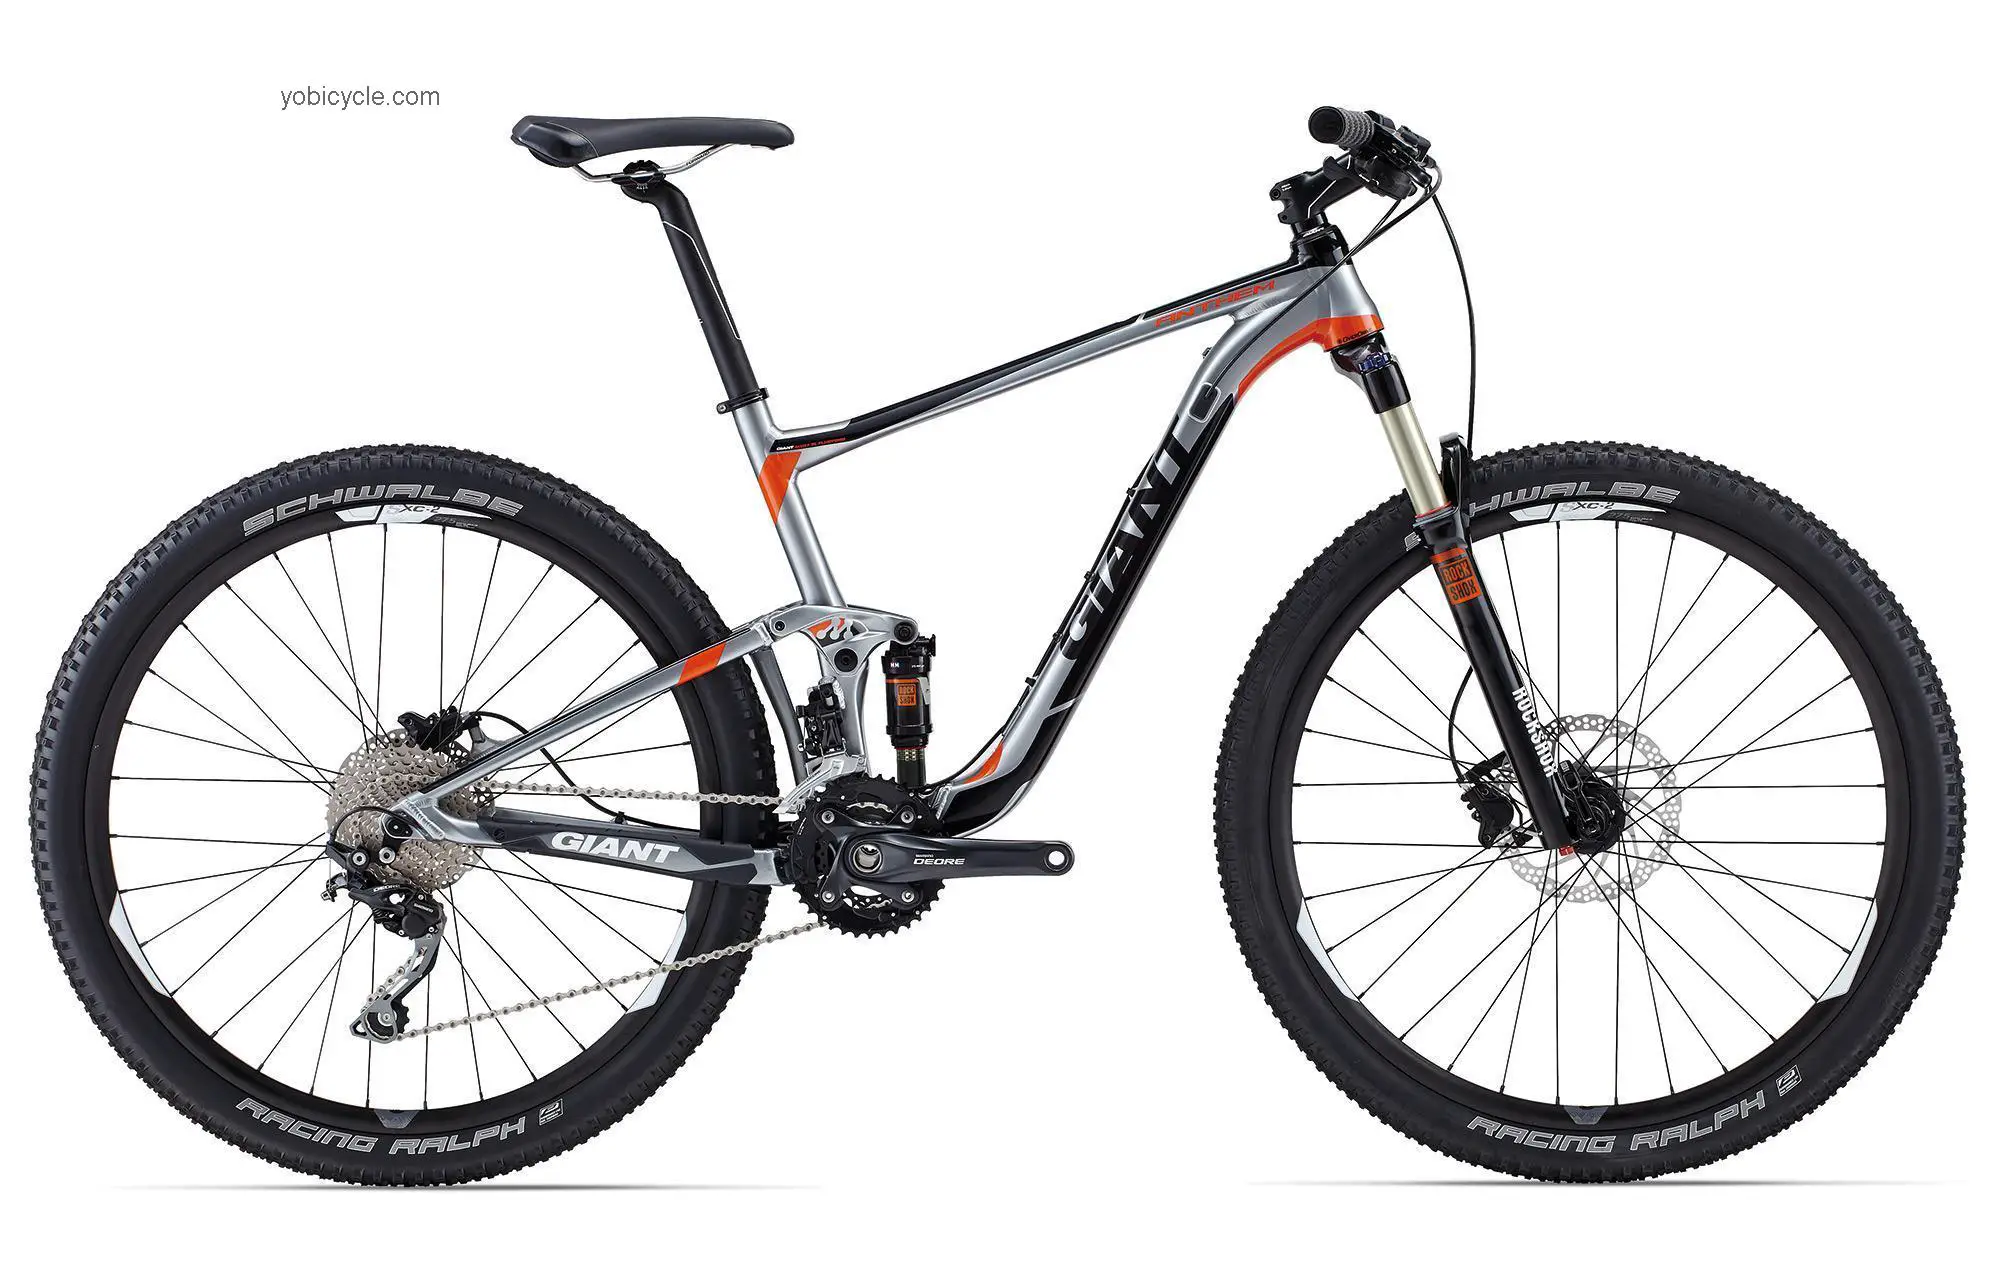 Giant Anthem 27.5 3 2015 comparison online with competitors